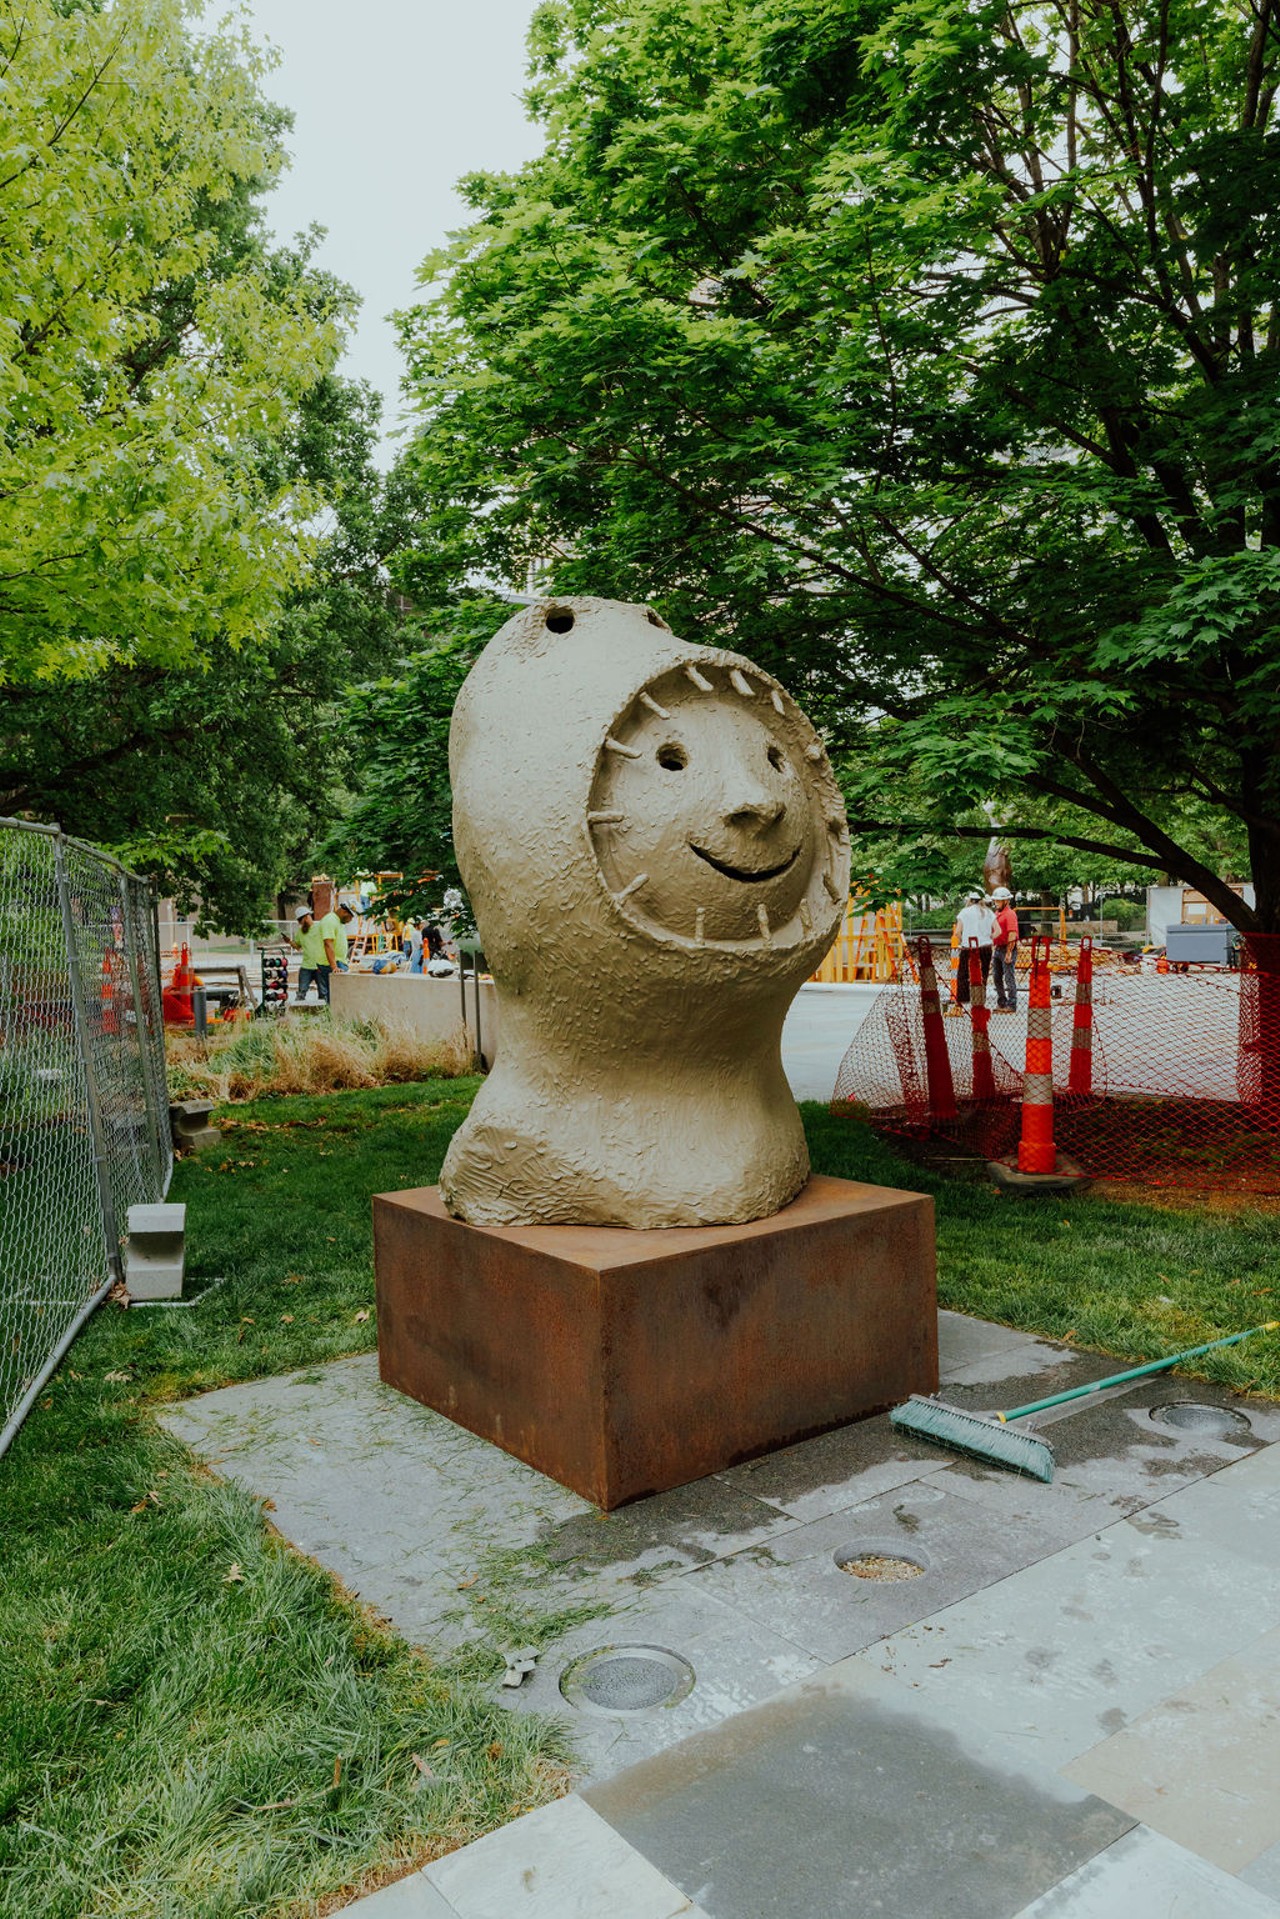 MOONRISE.east.may (2005) by Ugo Rondinone, shown after its recent installation, is now back at Citygarden and will be there permanently.